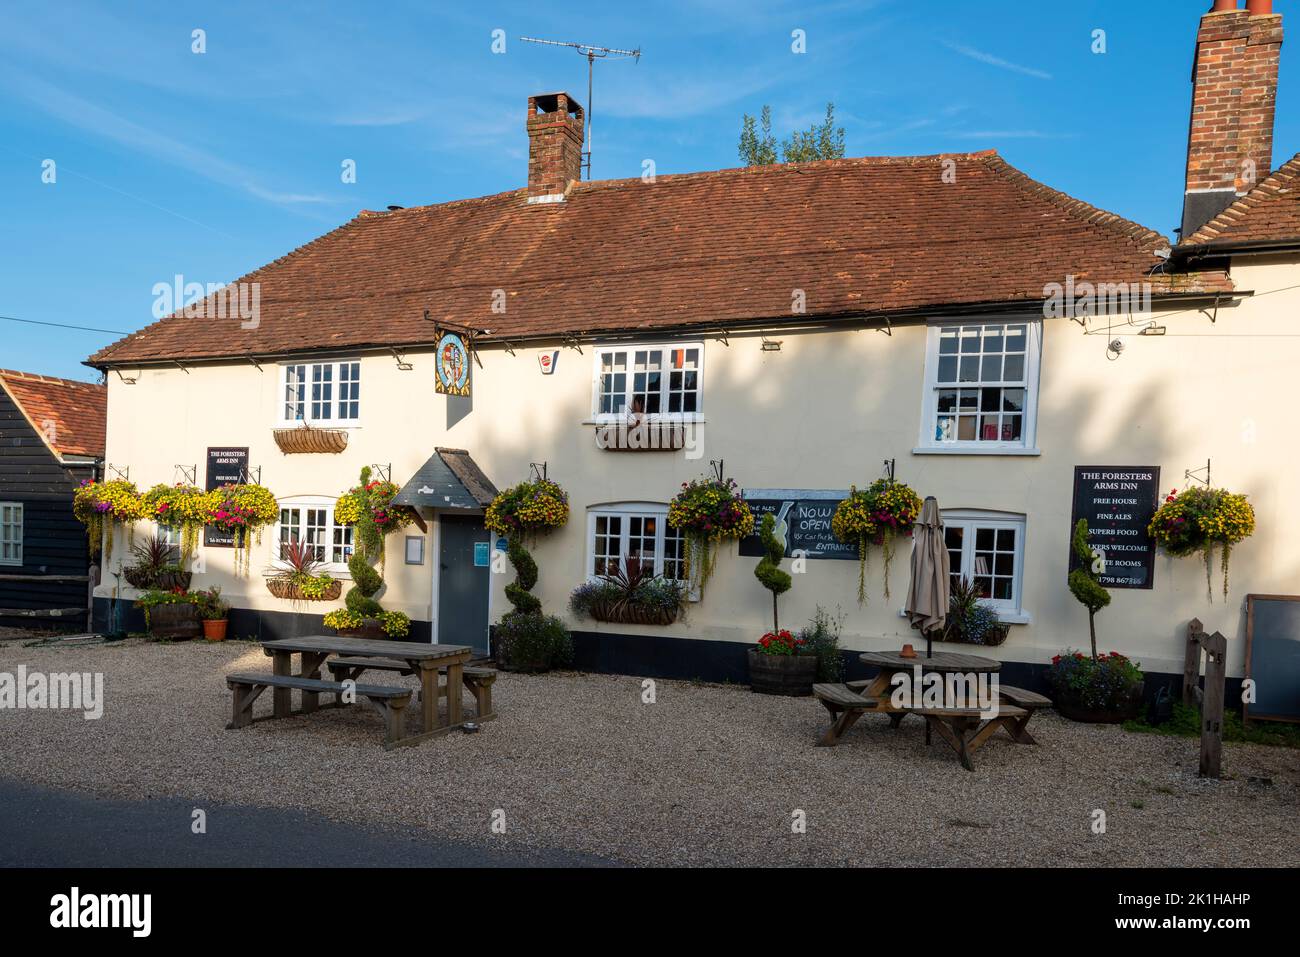 The Foresters Arms Inn public house in the downland village of Graffham, West Sussex, England, UK Stock Photo